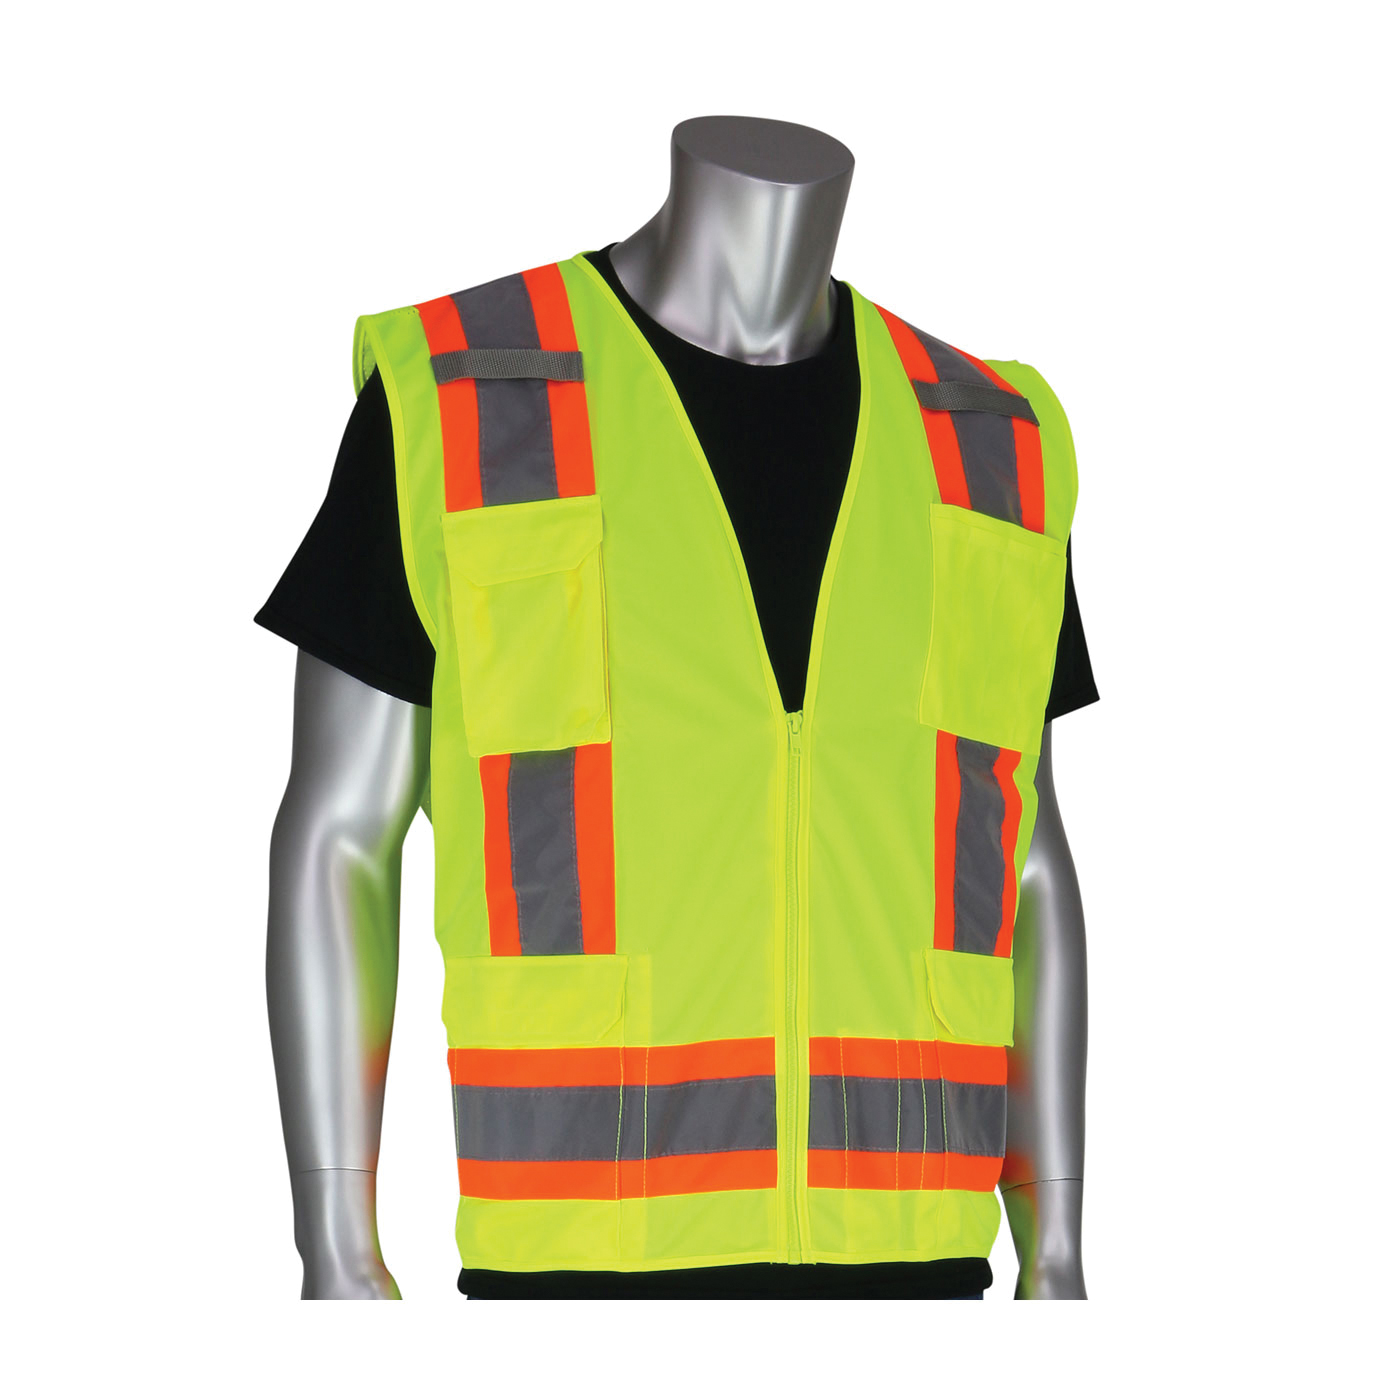 PIP® 302-0500-YEL/2X 2-Tone Surveyor Safety Vest, 2XL, Hi-Viz Lime Yellow, Polyester/Solid Tricot, Zipper Closure, 11 Pockets, ANSI Class: Class 2, Specifications Met: ANSI 107 Type R